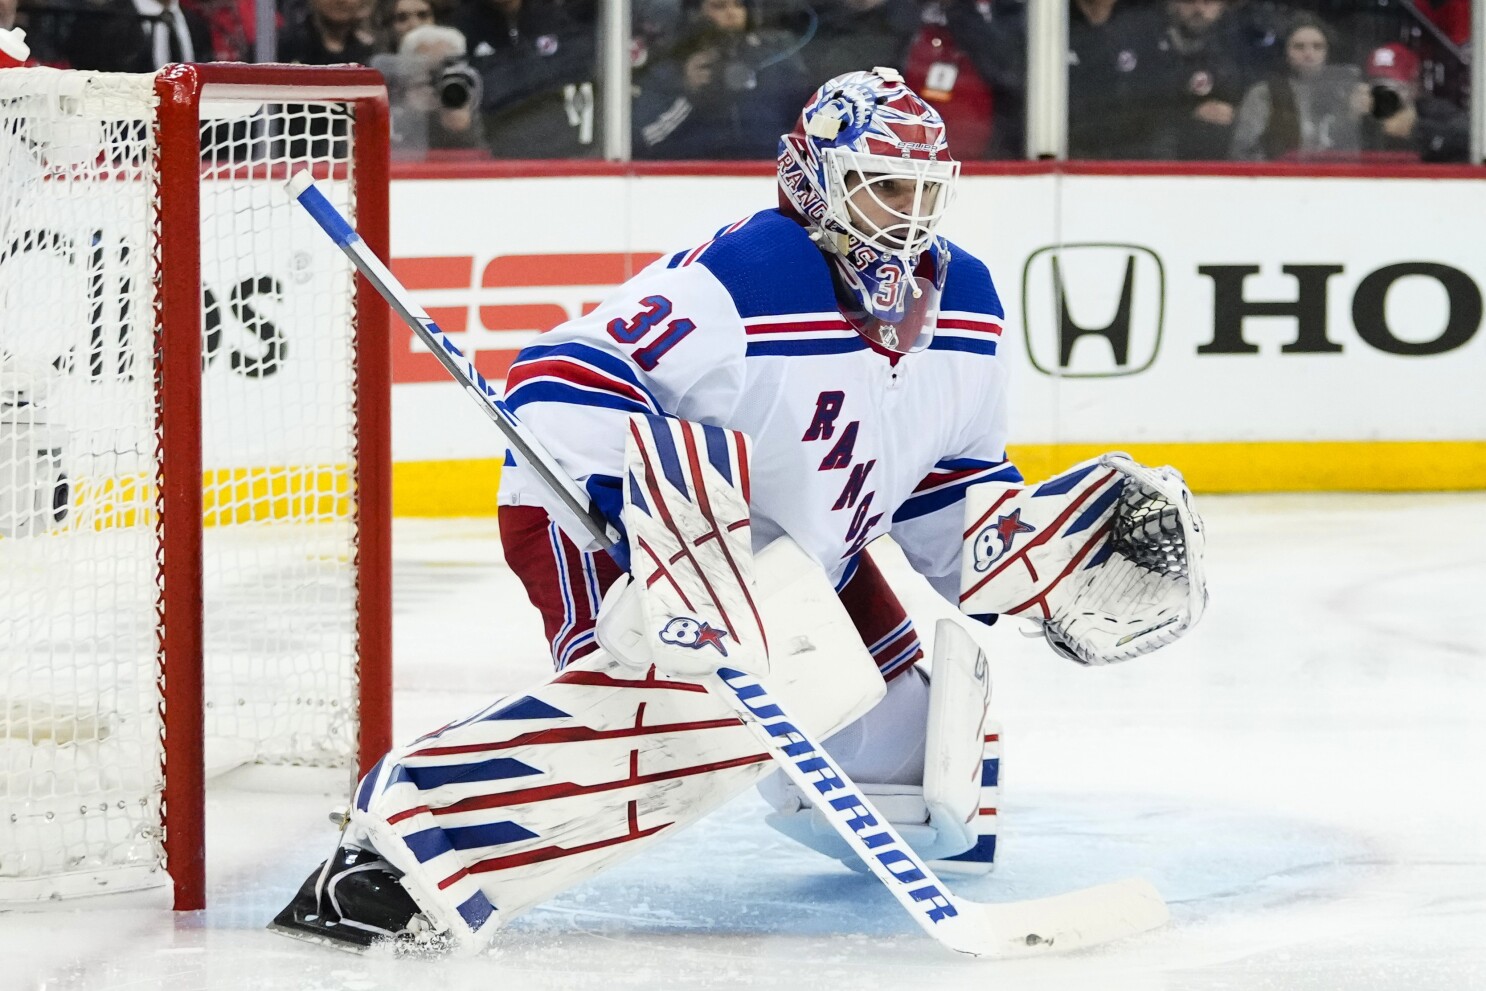 New-look Rangers displaying pack mentality